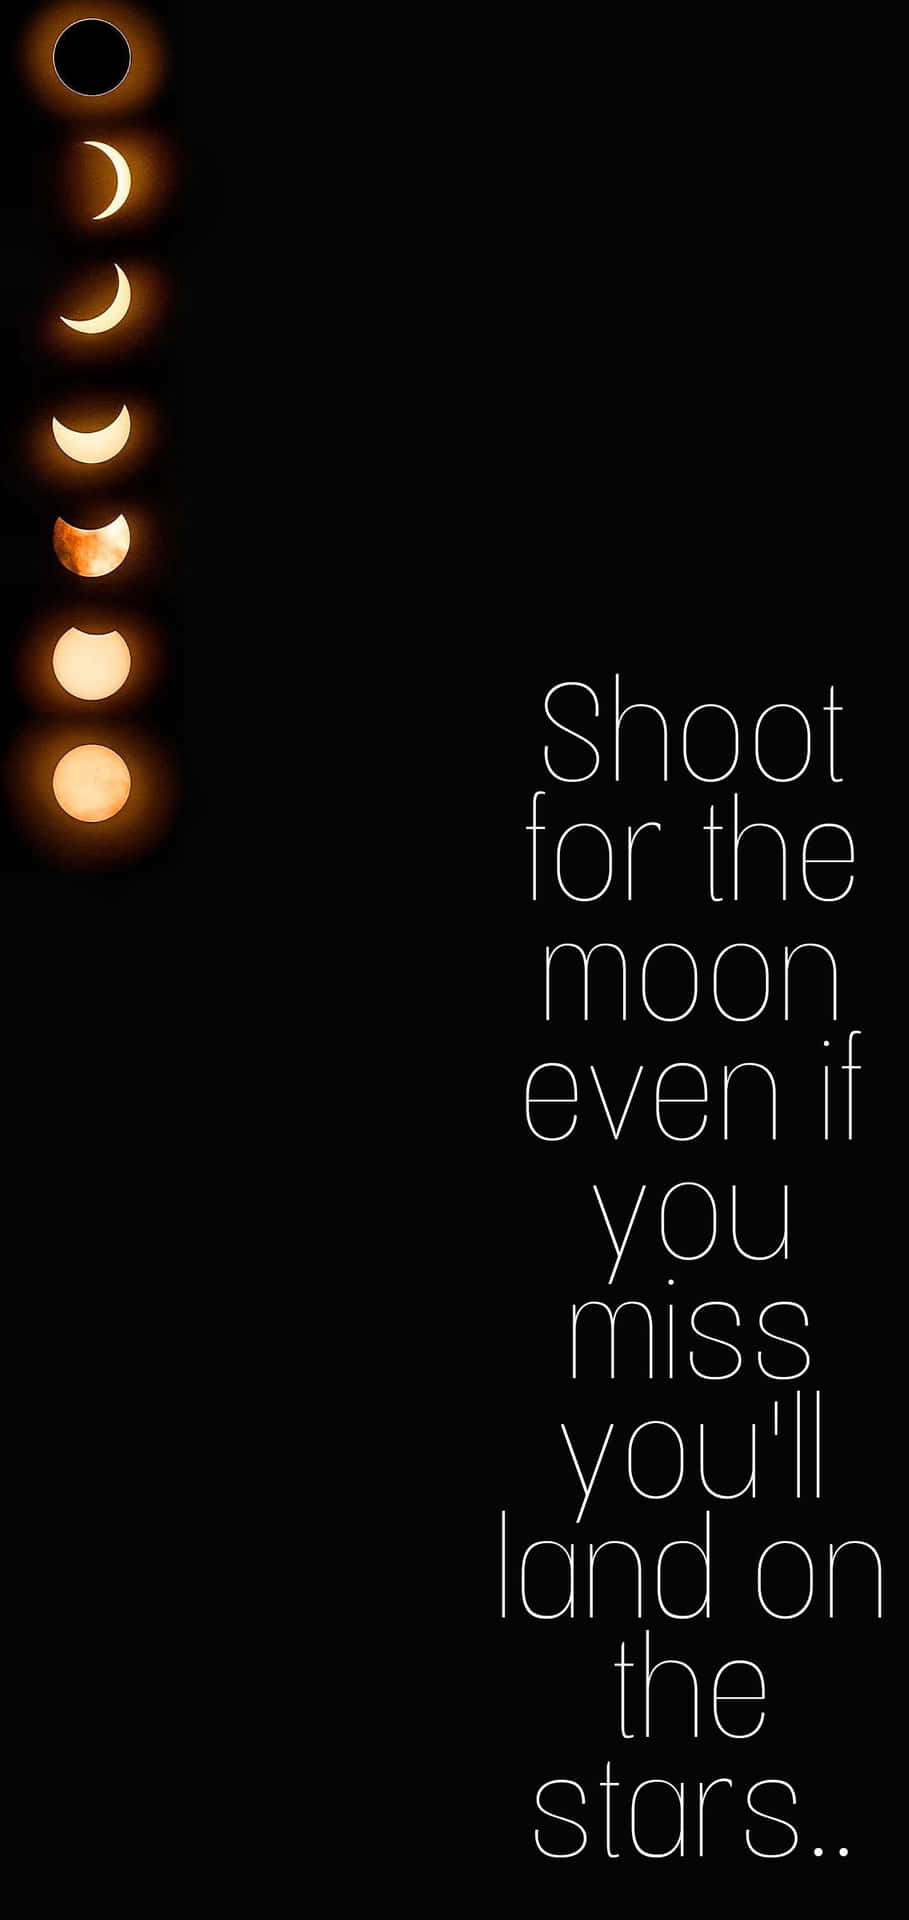 A Black And White Photo Of The Moon With The Words Shoot For The Moon Even If You Miss Land On The Stars